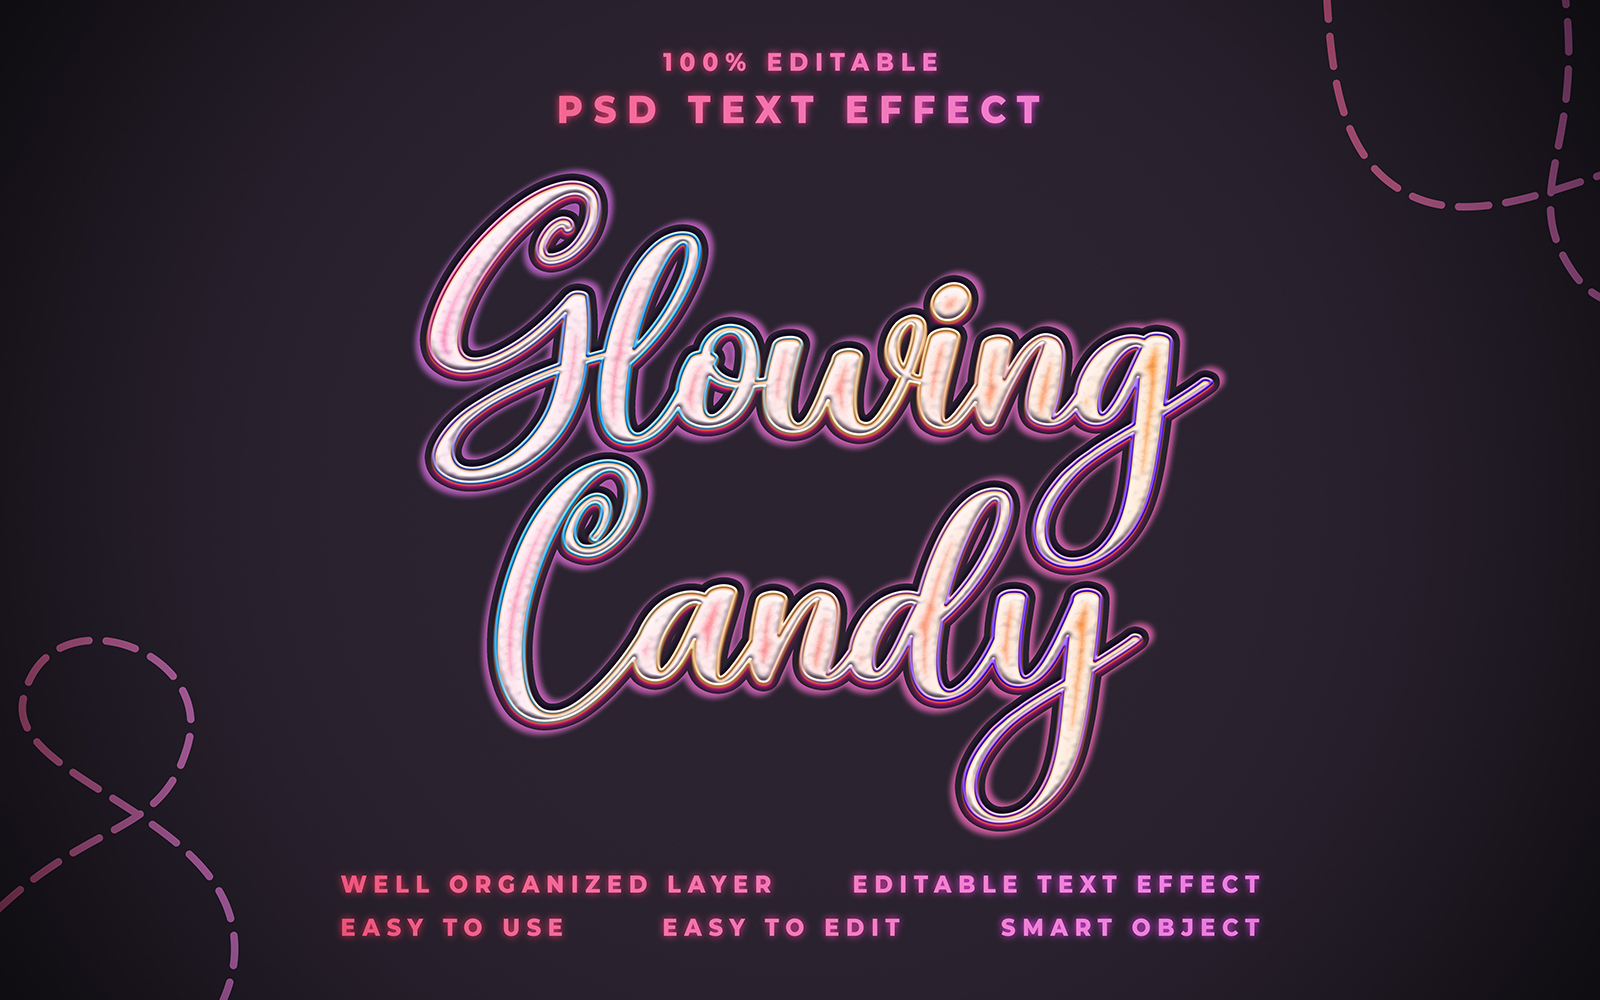 Glowing Candy Text Effect